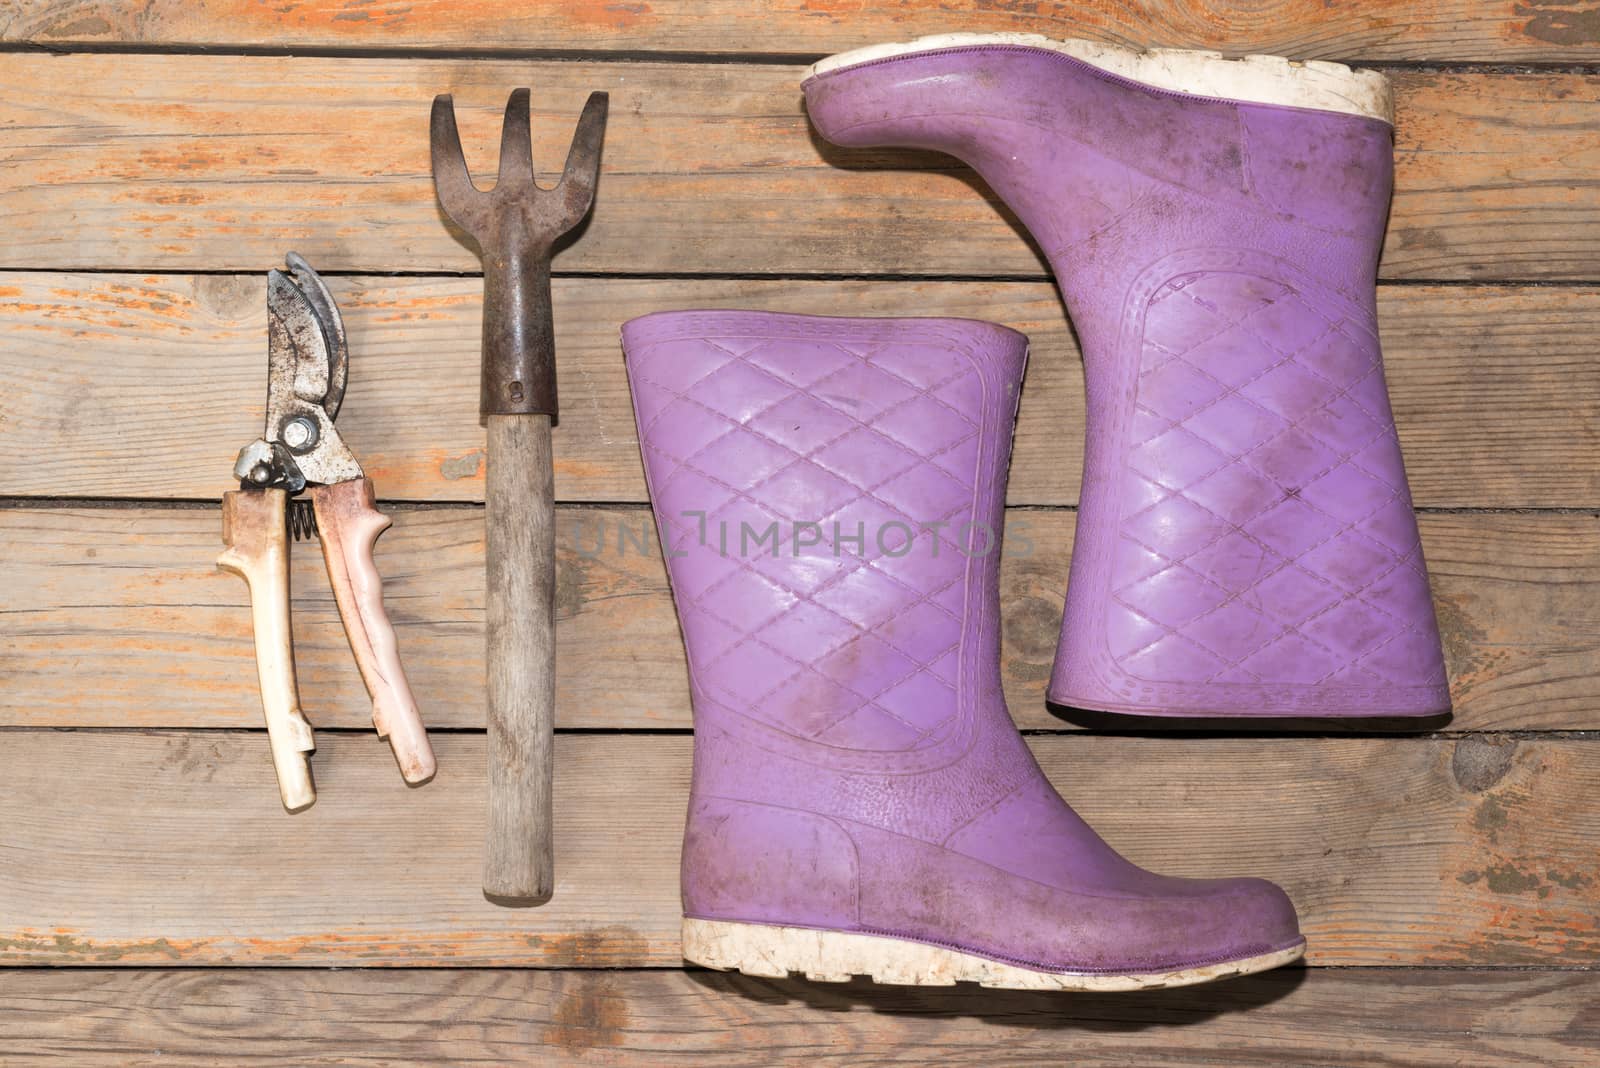 Old wooden texture background with tools and wellingtons, close up view